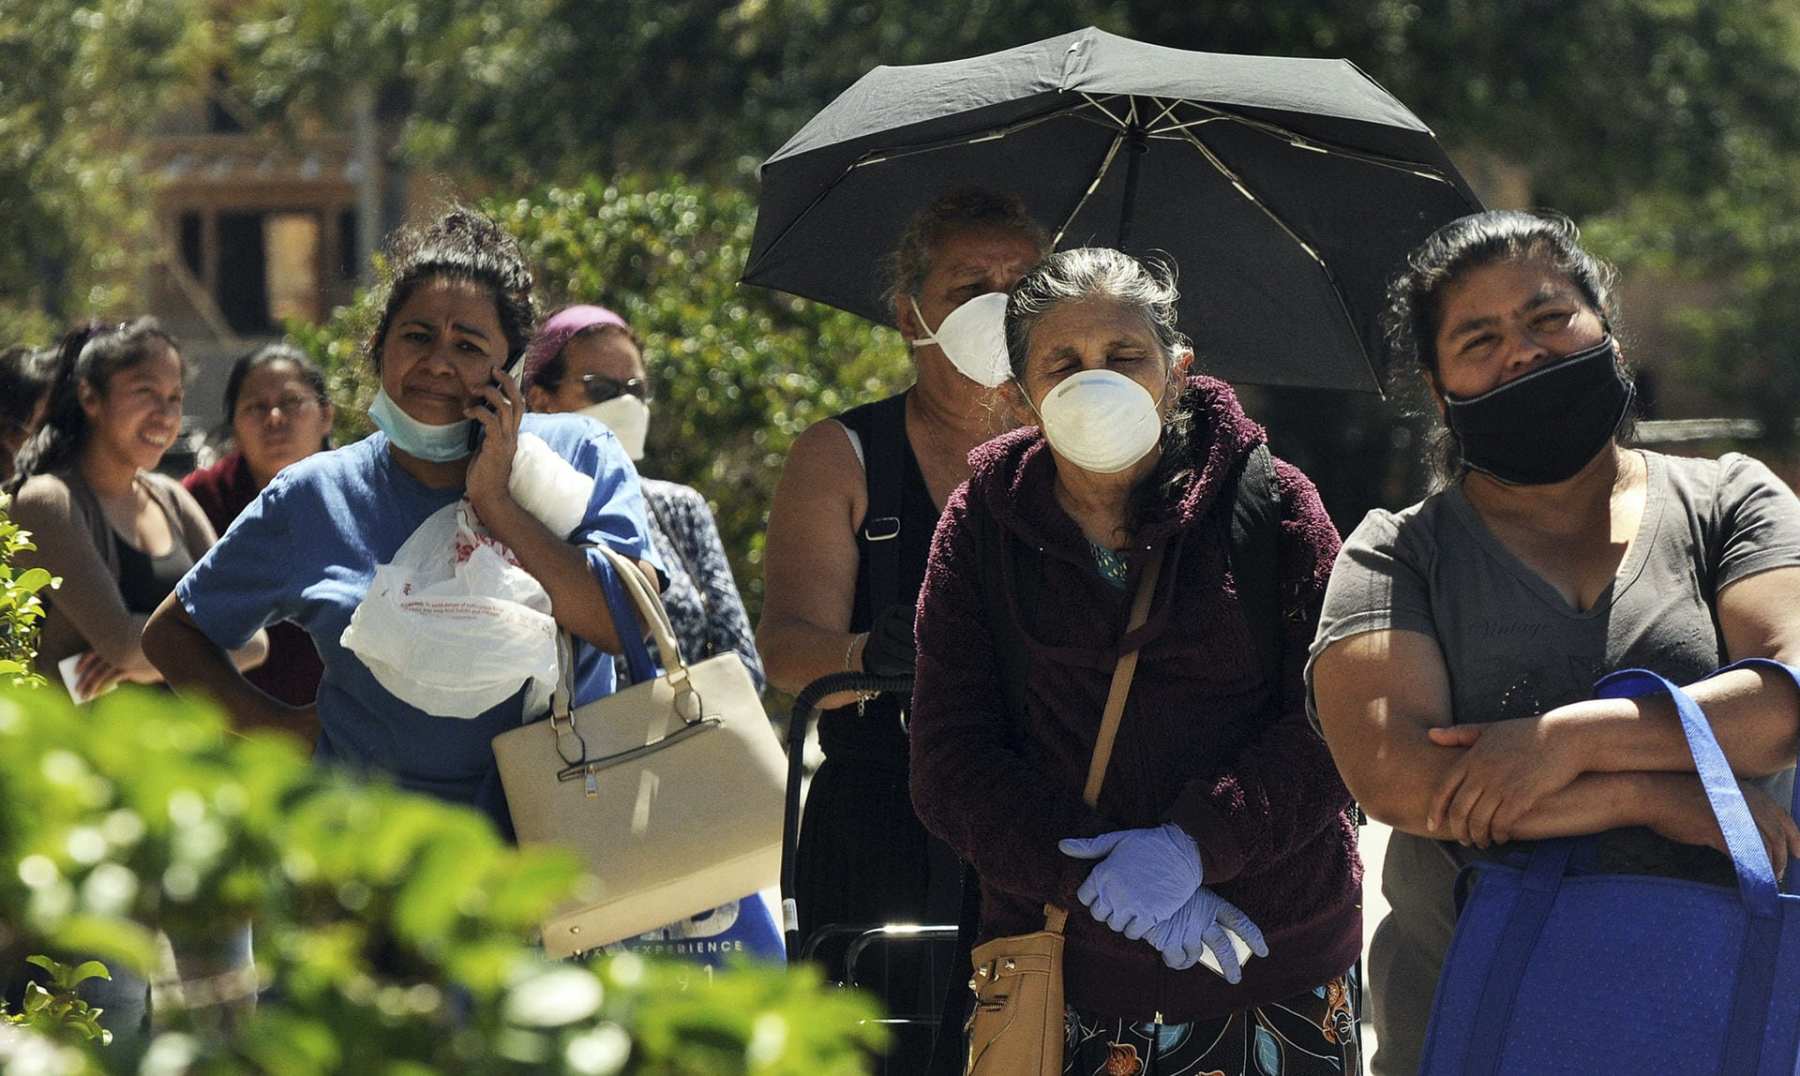 Women wearing protective masks wait in a queue to receive food assistance provided by the Second Harvest Food Bank of Central Florida at a food distribution event staffed by volunteers at the Calvario City Church. Food banks across the United States are being overwhelmed due to the thousands of people who have lost their jobs due to the coronavirus (COVID-19) pandemic.